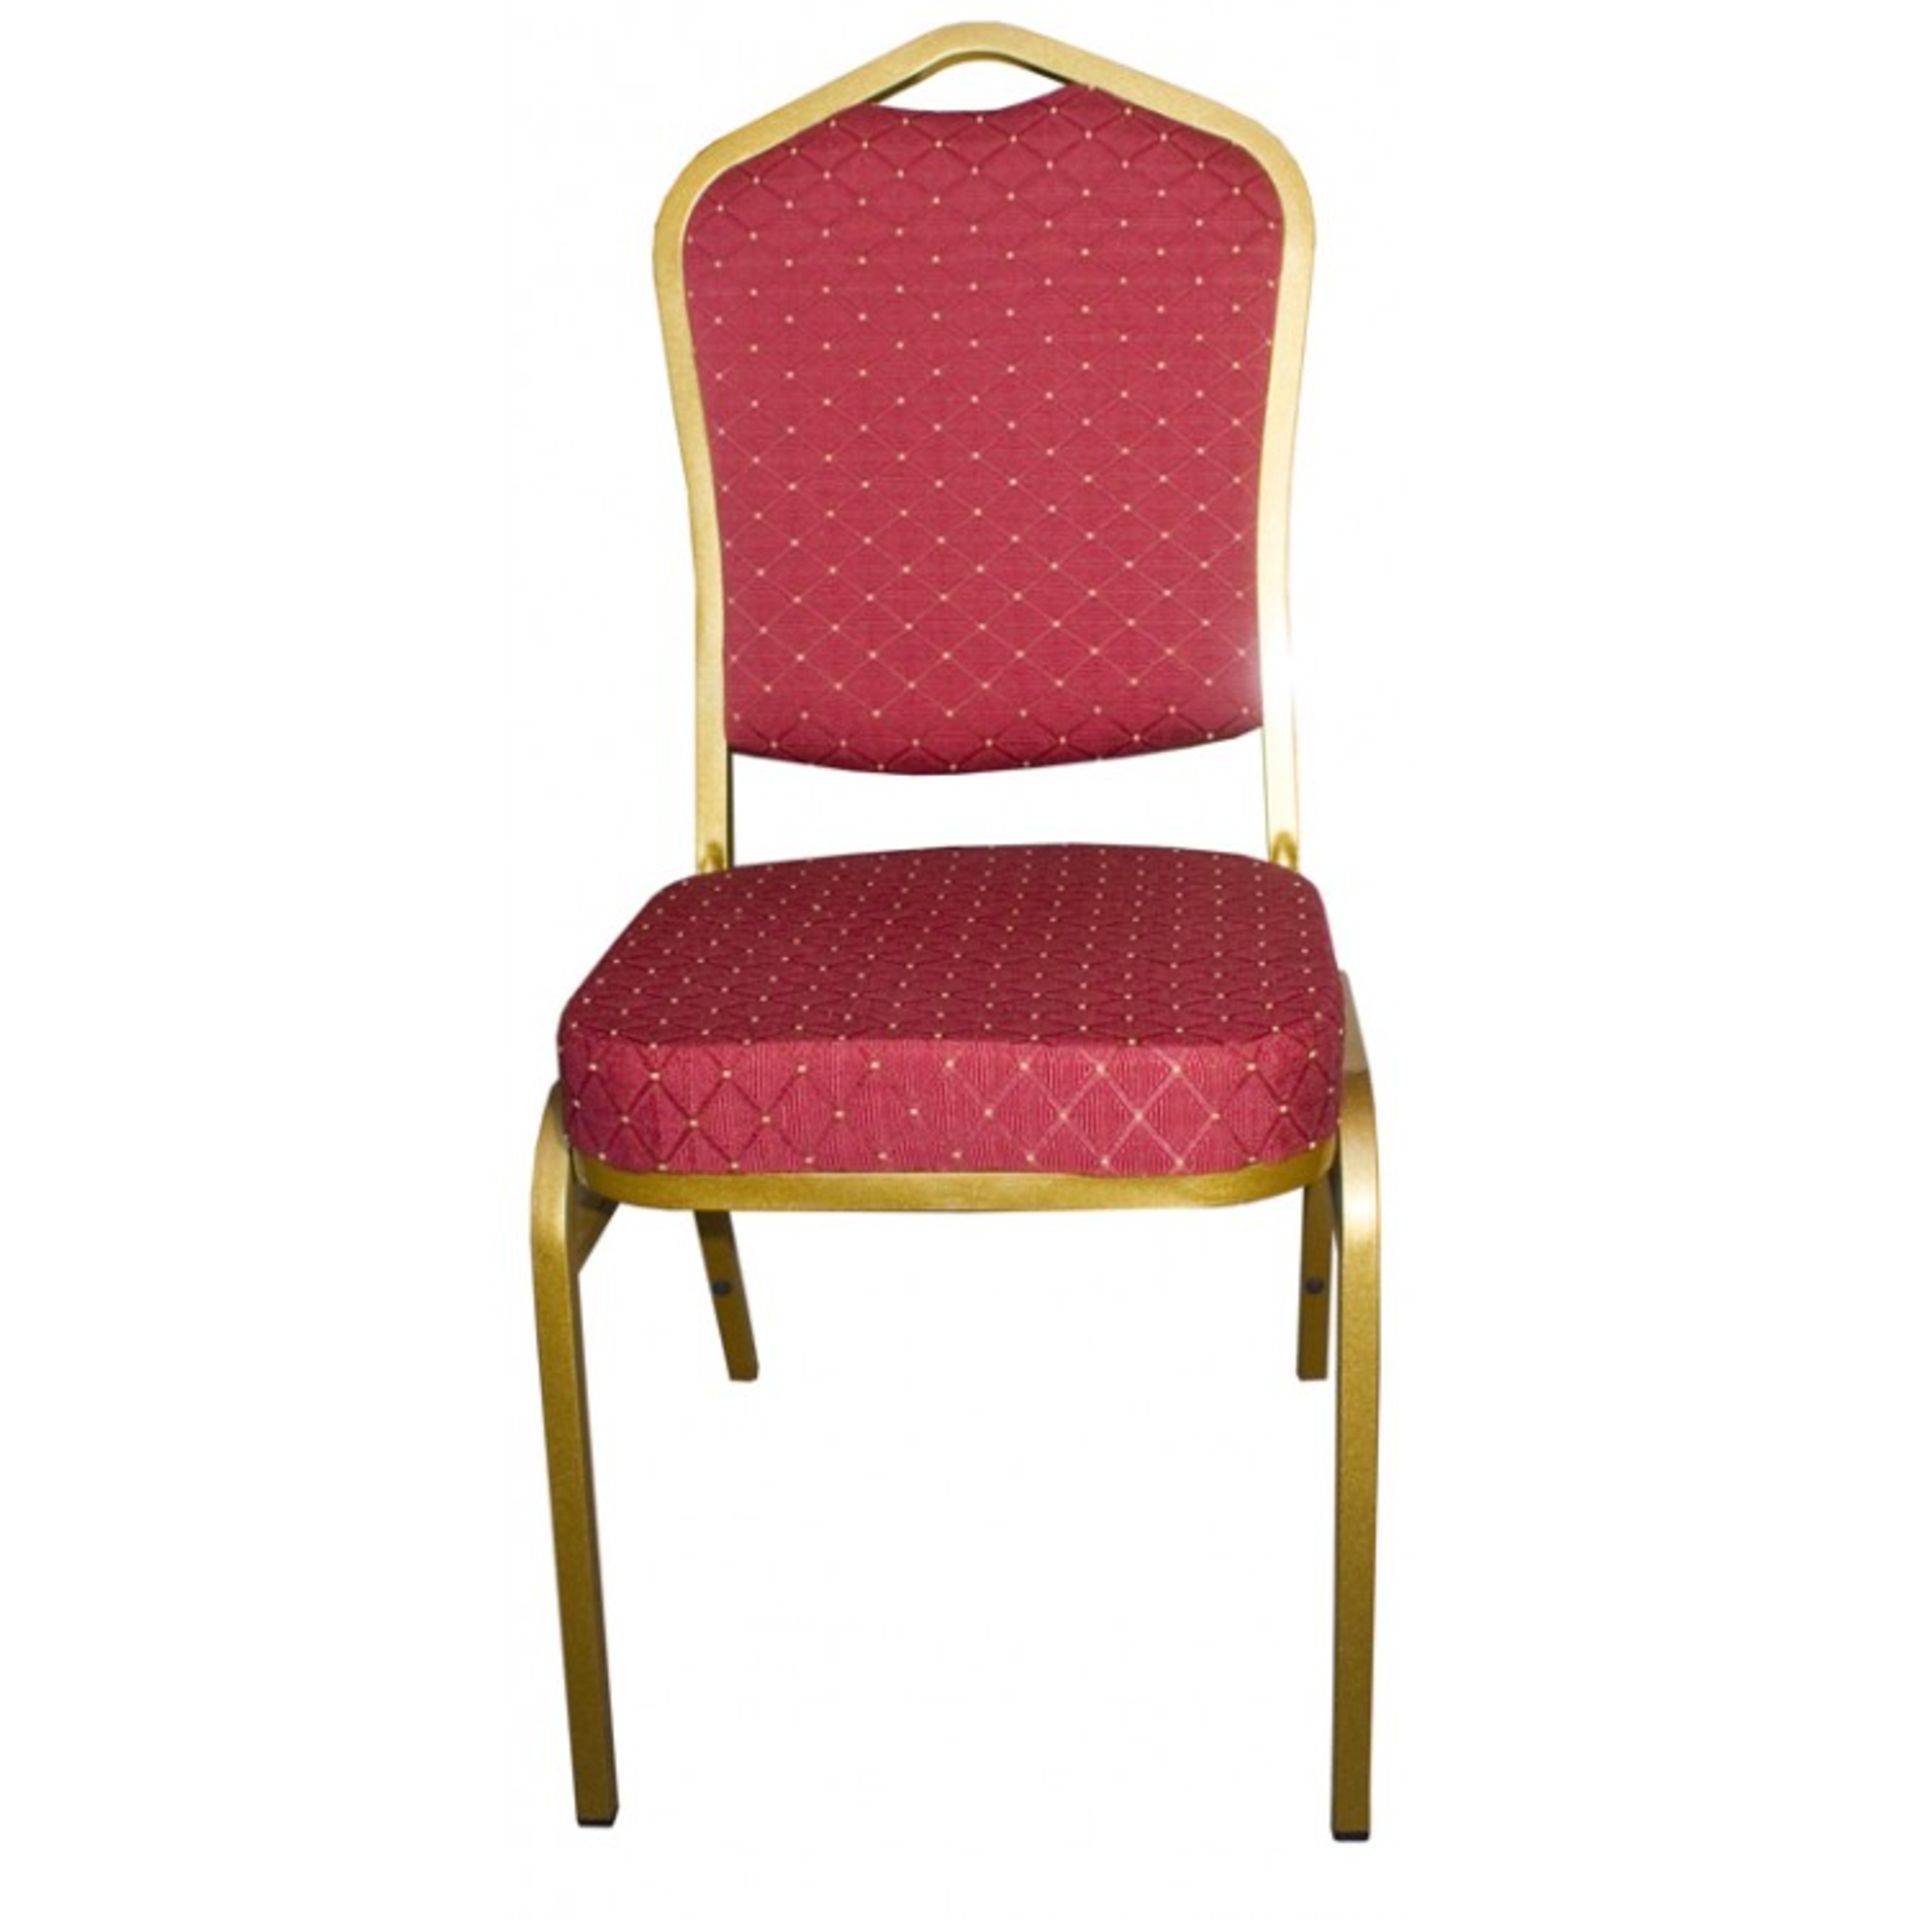 100 x Burgundy Steel Banqueting Chairs - BRAND NEW

Brand new & unused. Made with a burgundy - Image 4 of 4